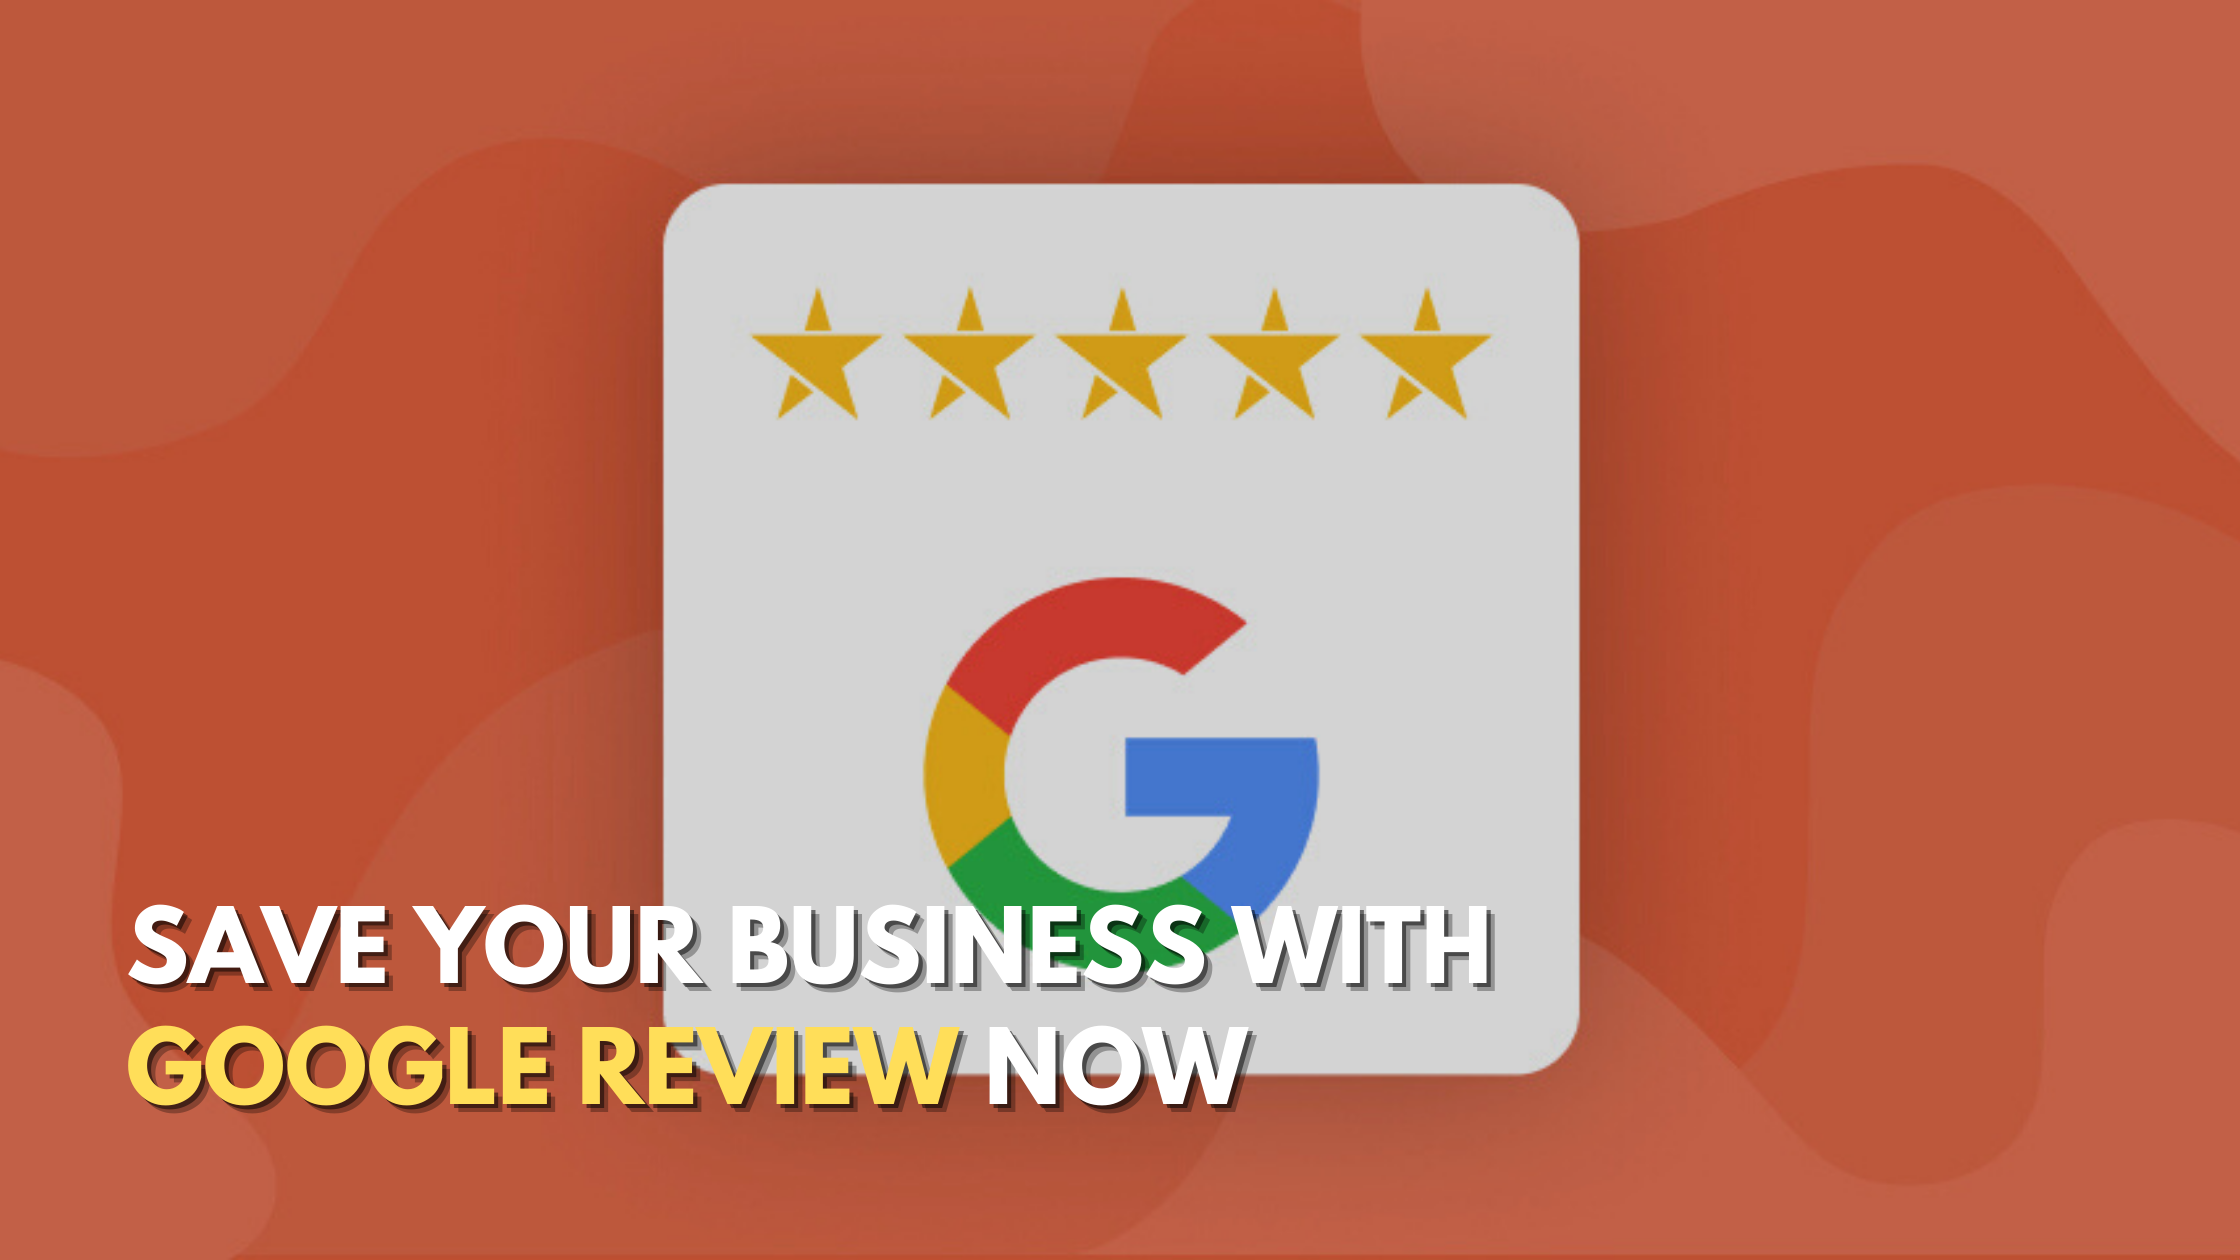 why-does-my-business-need-google-reviews-locus-t-sdn-bhd